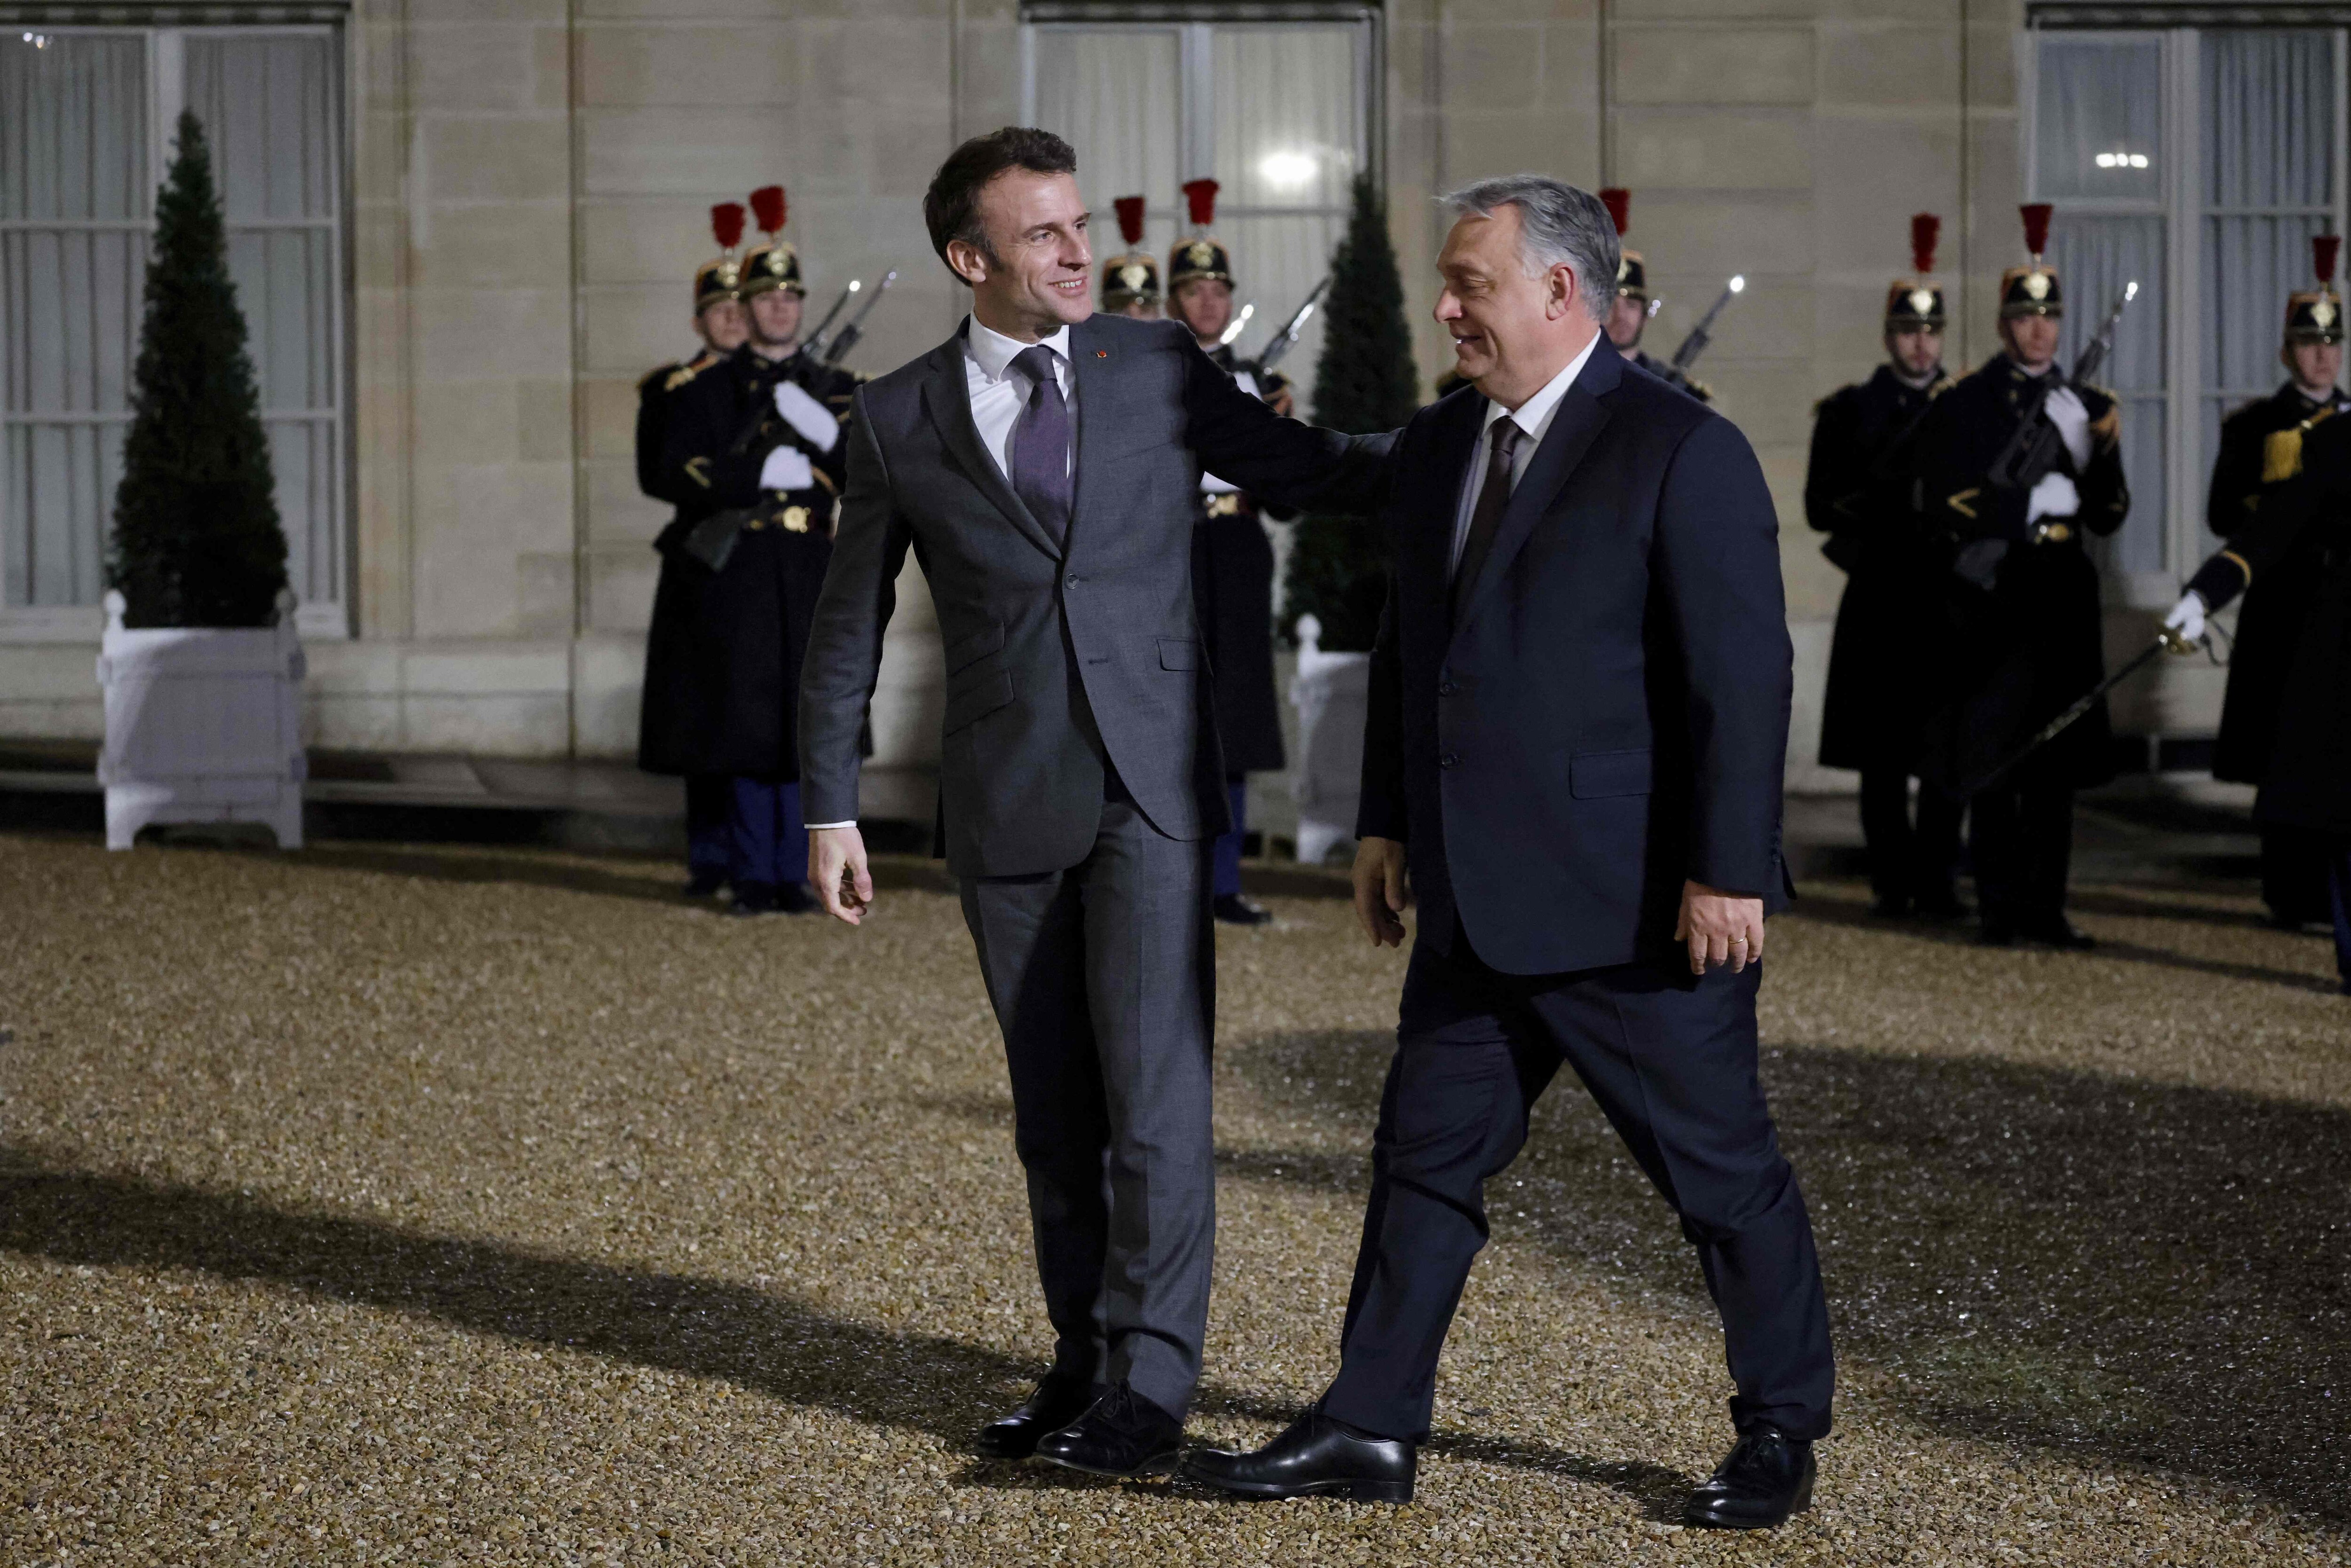 Fance's President Emmanuel Macron (C) welcomes Hungarian Prime Minister Viktor Orban (R), before a working dinner at the Elysee Presidential Palace in Paris on March 13, 2023. (Photo by Ludovic MARIN / AFP)